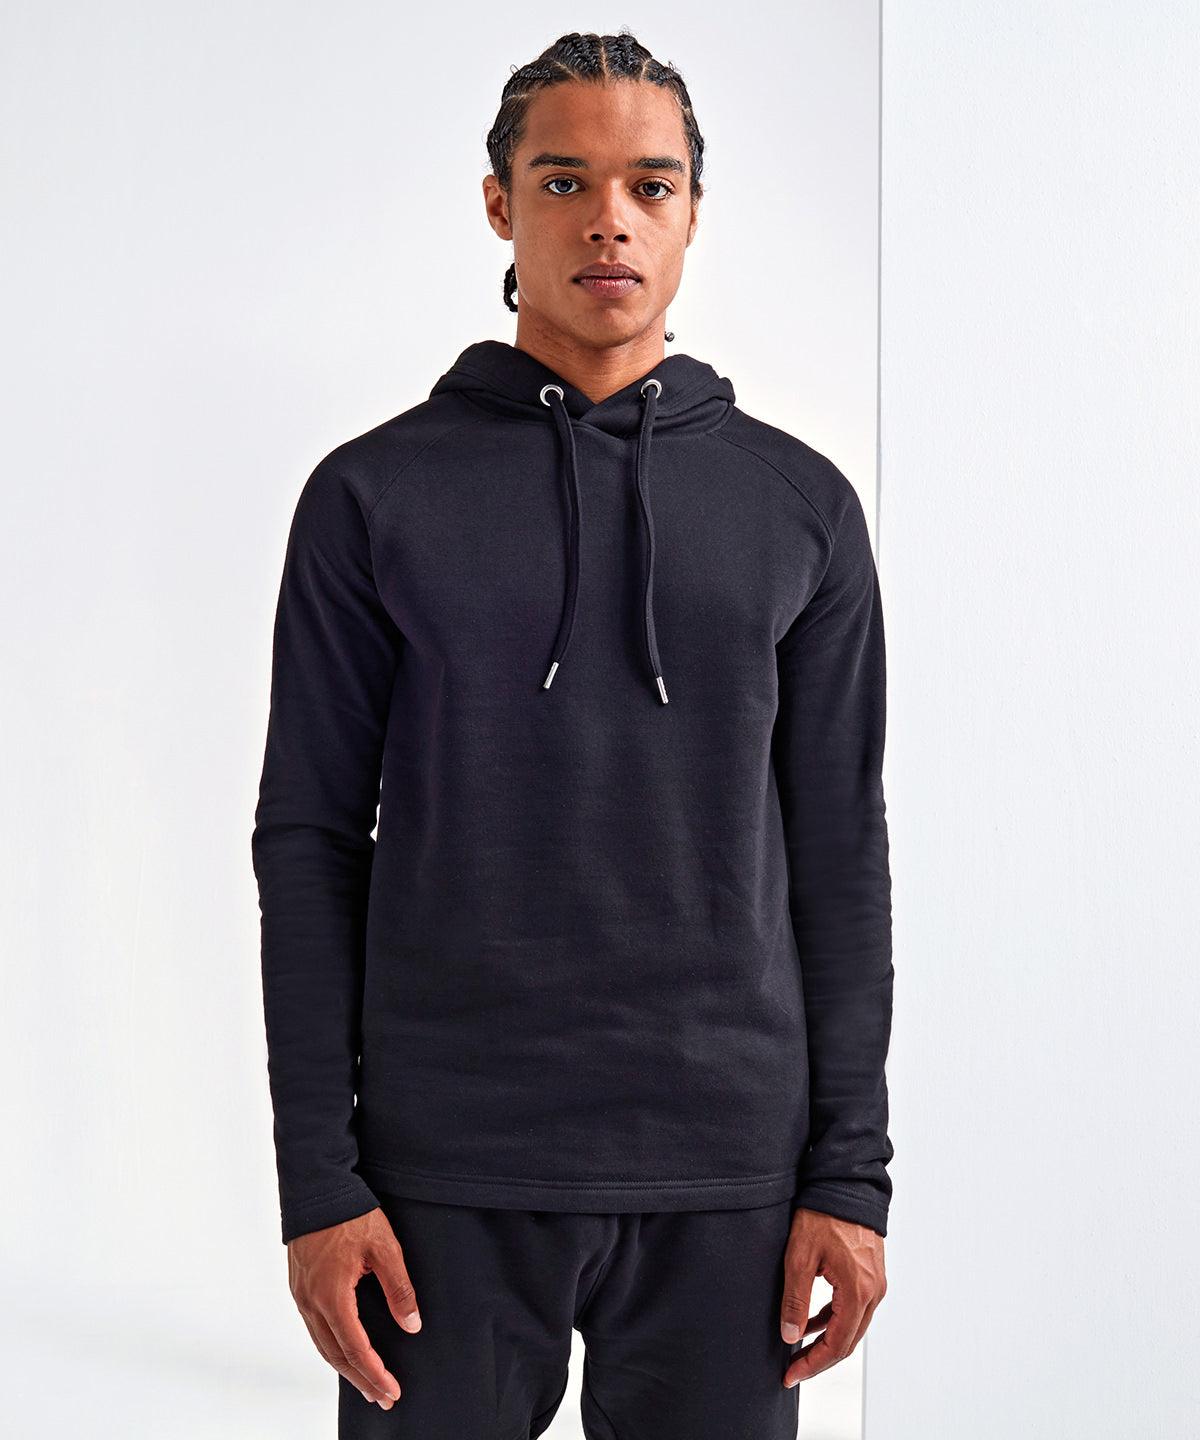 Black - Men's TriDri® hoodie Hoodies TriDri® Co-ords, Everyday Essentials, Exclusives, Home of the hoodie, Hoodies, Must Haves, New For 2021, New In Autumn Winter, New In Mid Year, Street Casual, Streetwear, Tracksuits, Working From Home Schoolwear Centres